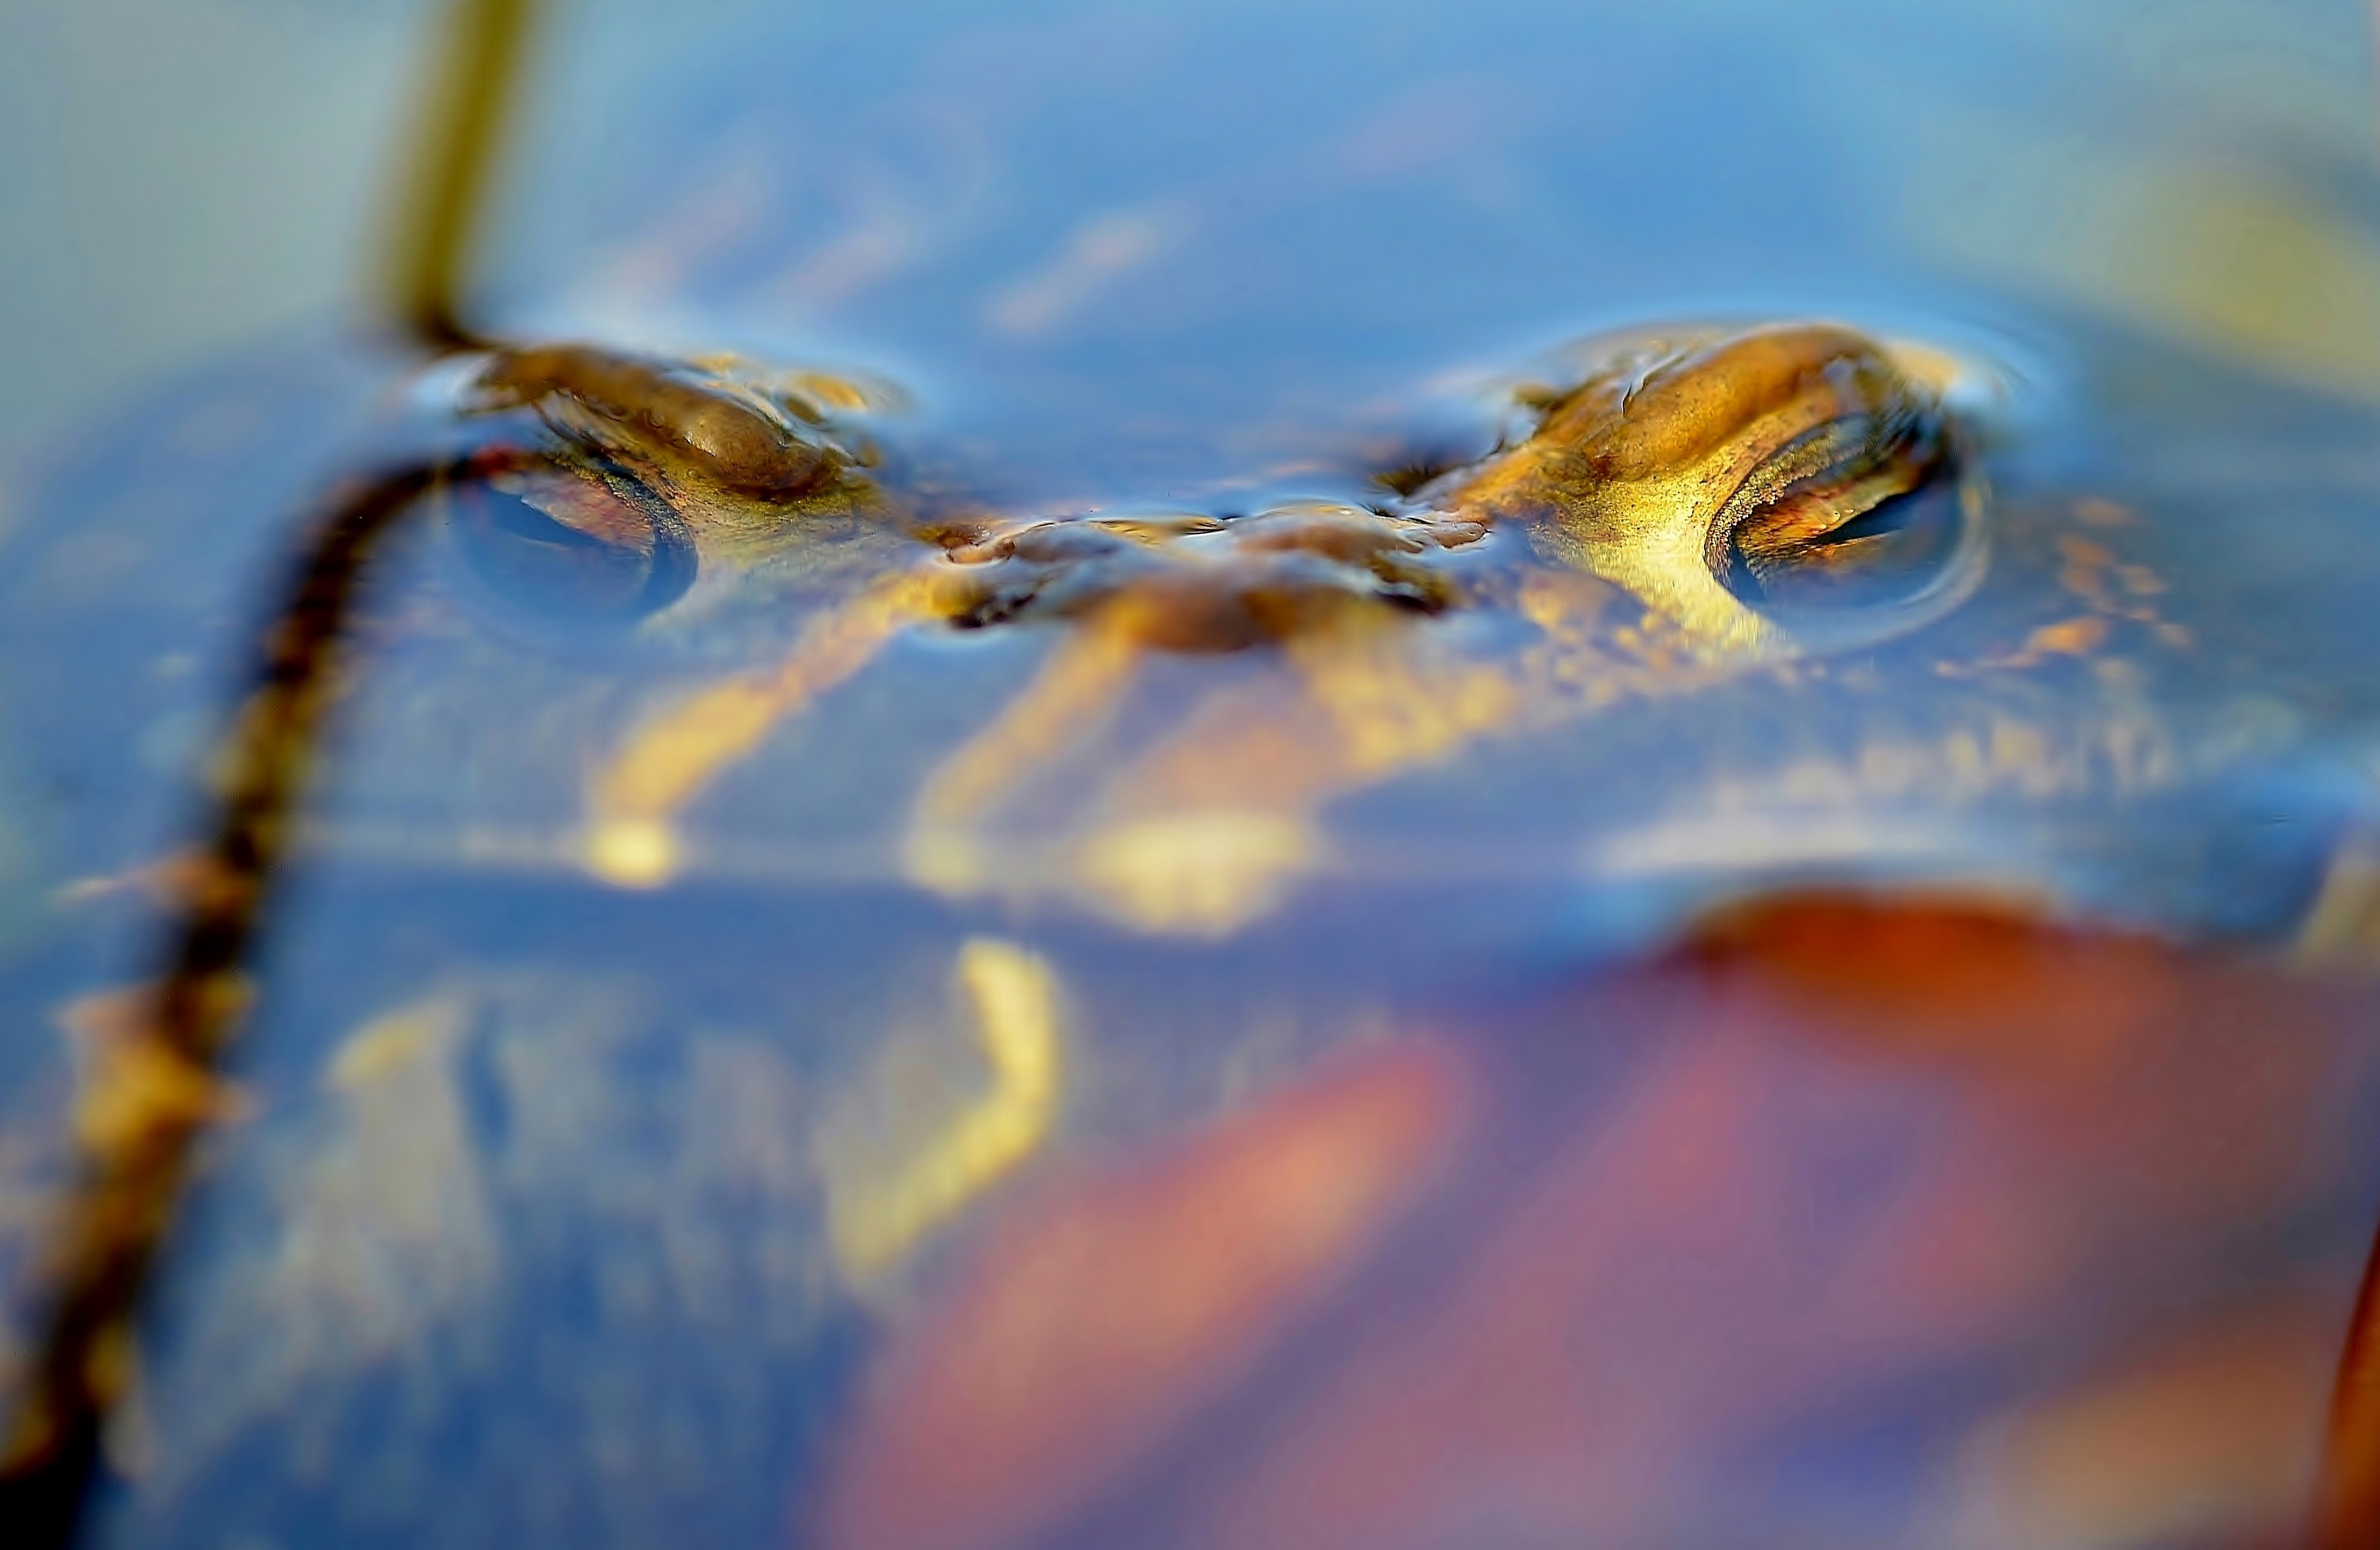 shallow focus photo of frog on body of water